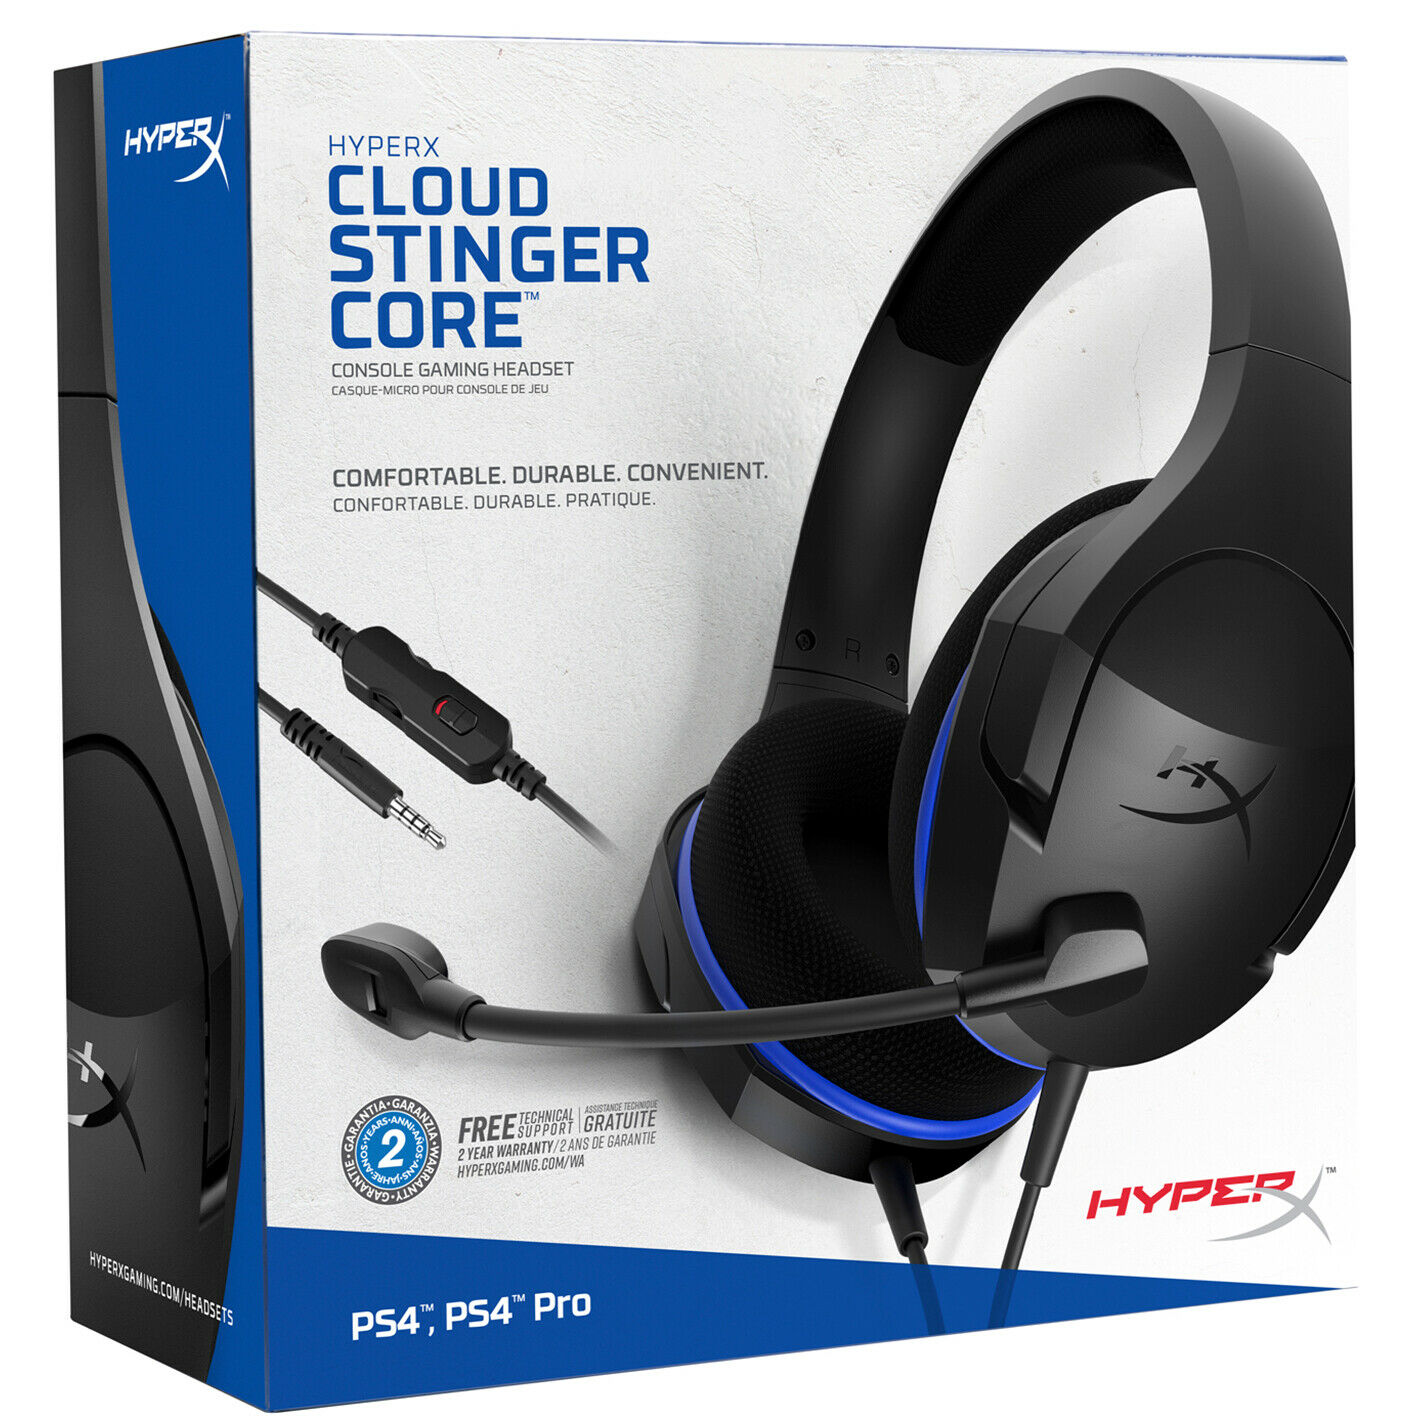 Hyperx Cloud Stinger Core - Gaming Headset For Ps4, Nintendo Switch, Xbox One